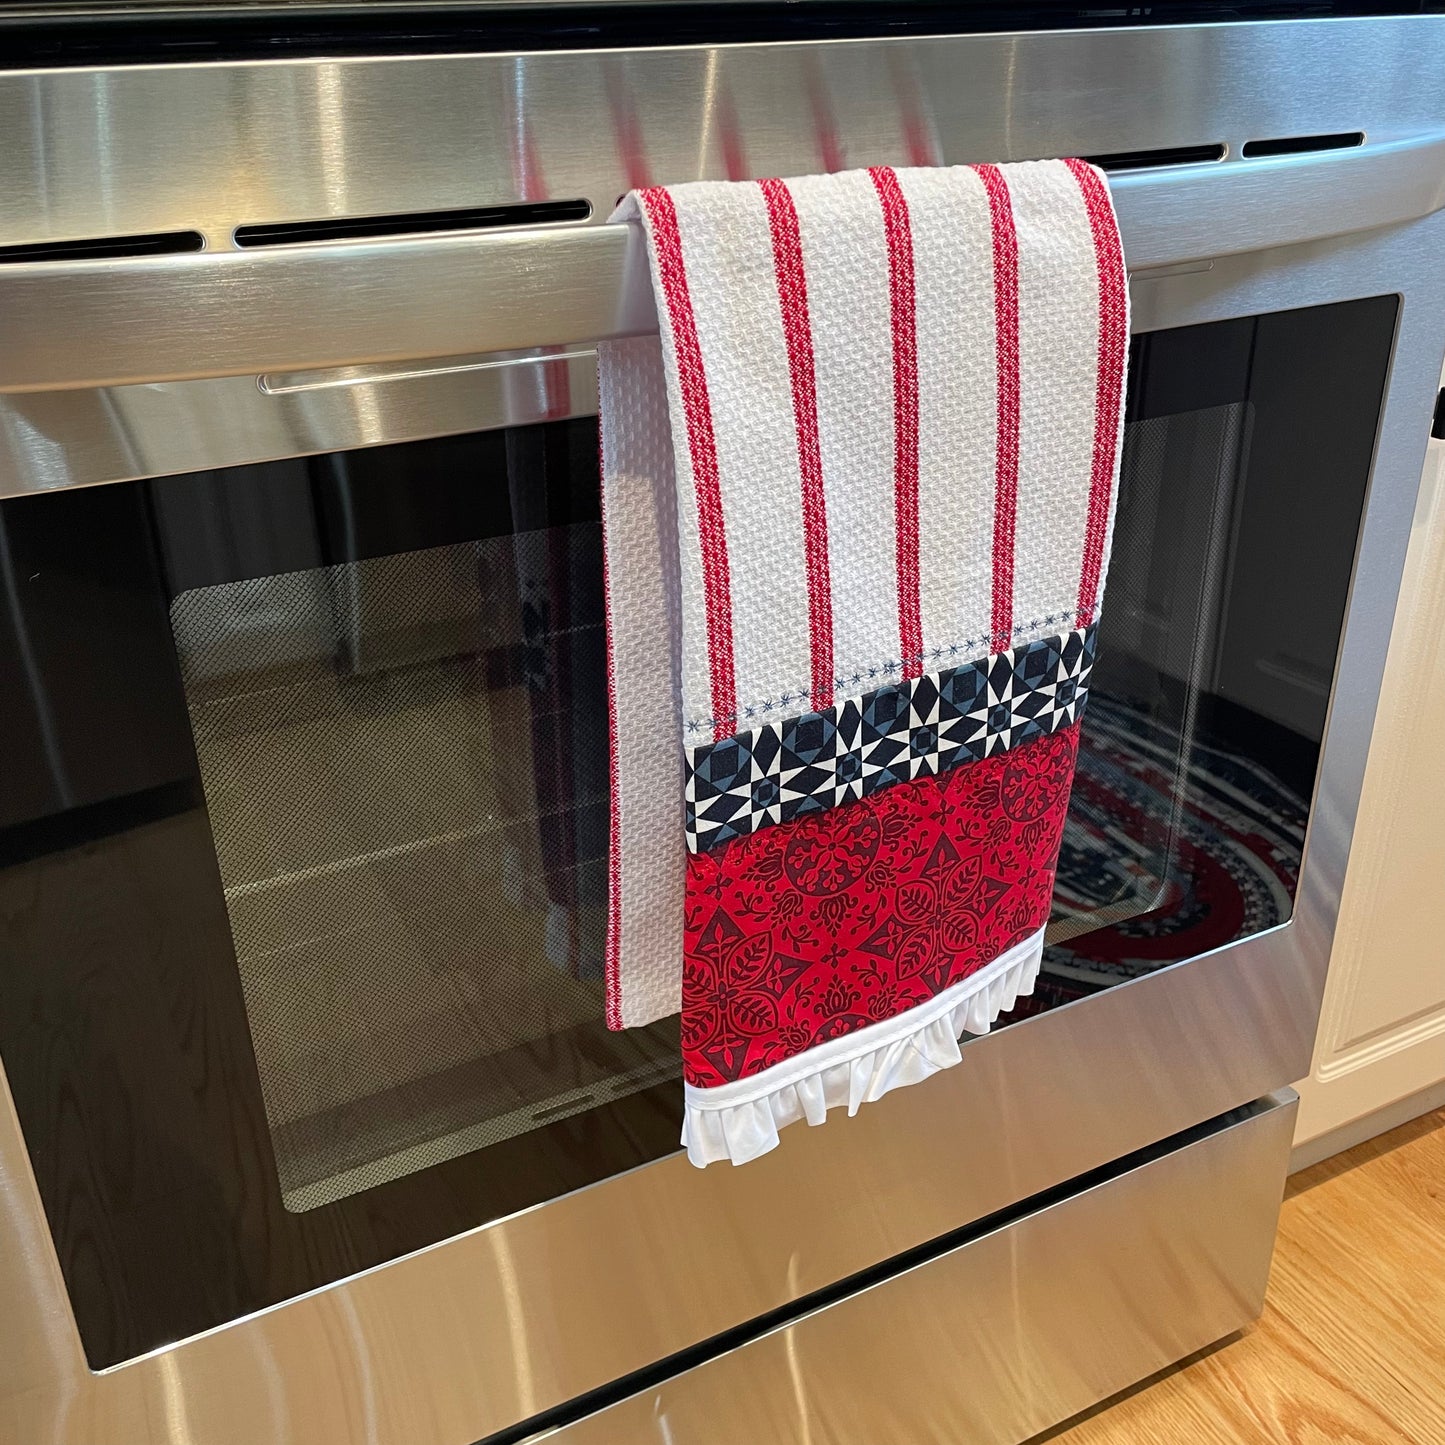 Red and White Handcrafted Kitchen Dish Towel, Modern Farmhouse Tea Towel - Home Stitchery Decor